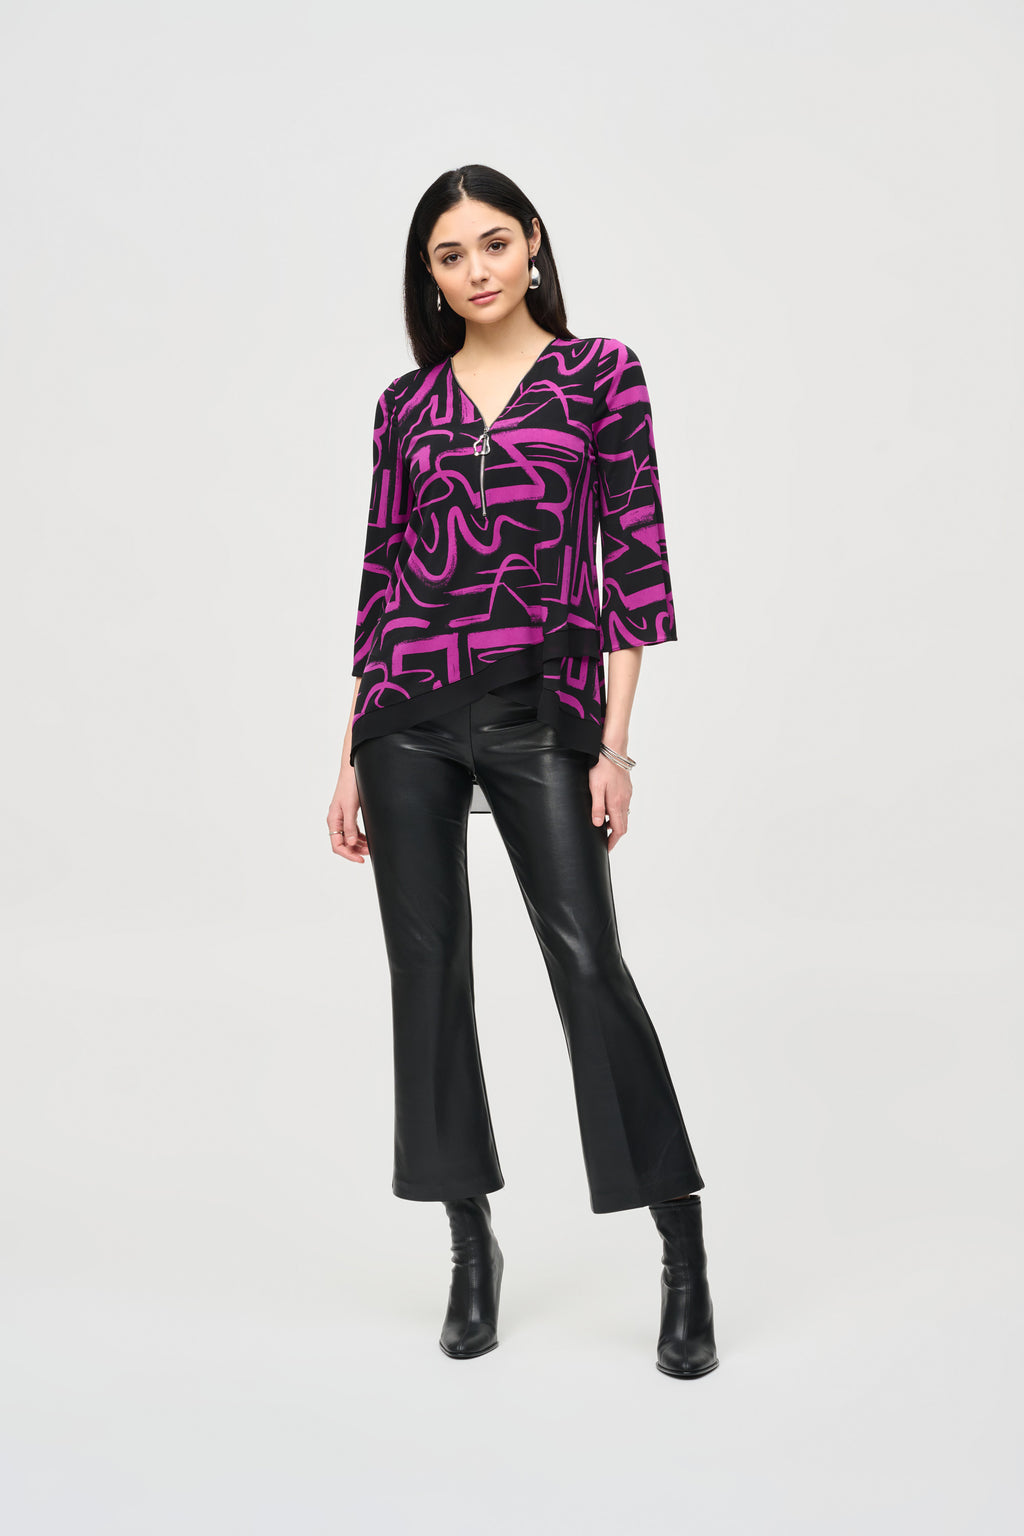 Joseph Ribkoff silky knit abstract print top in magenta (front)